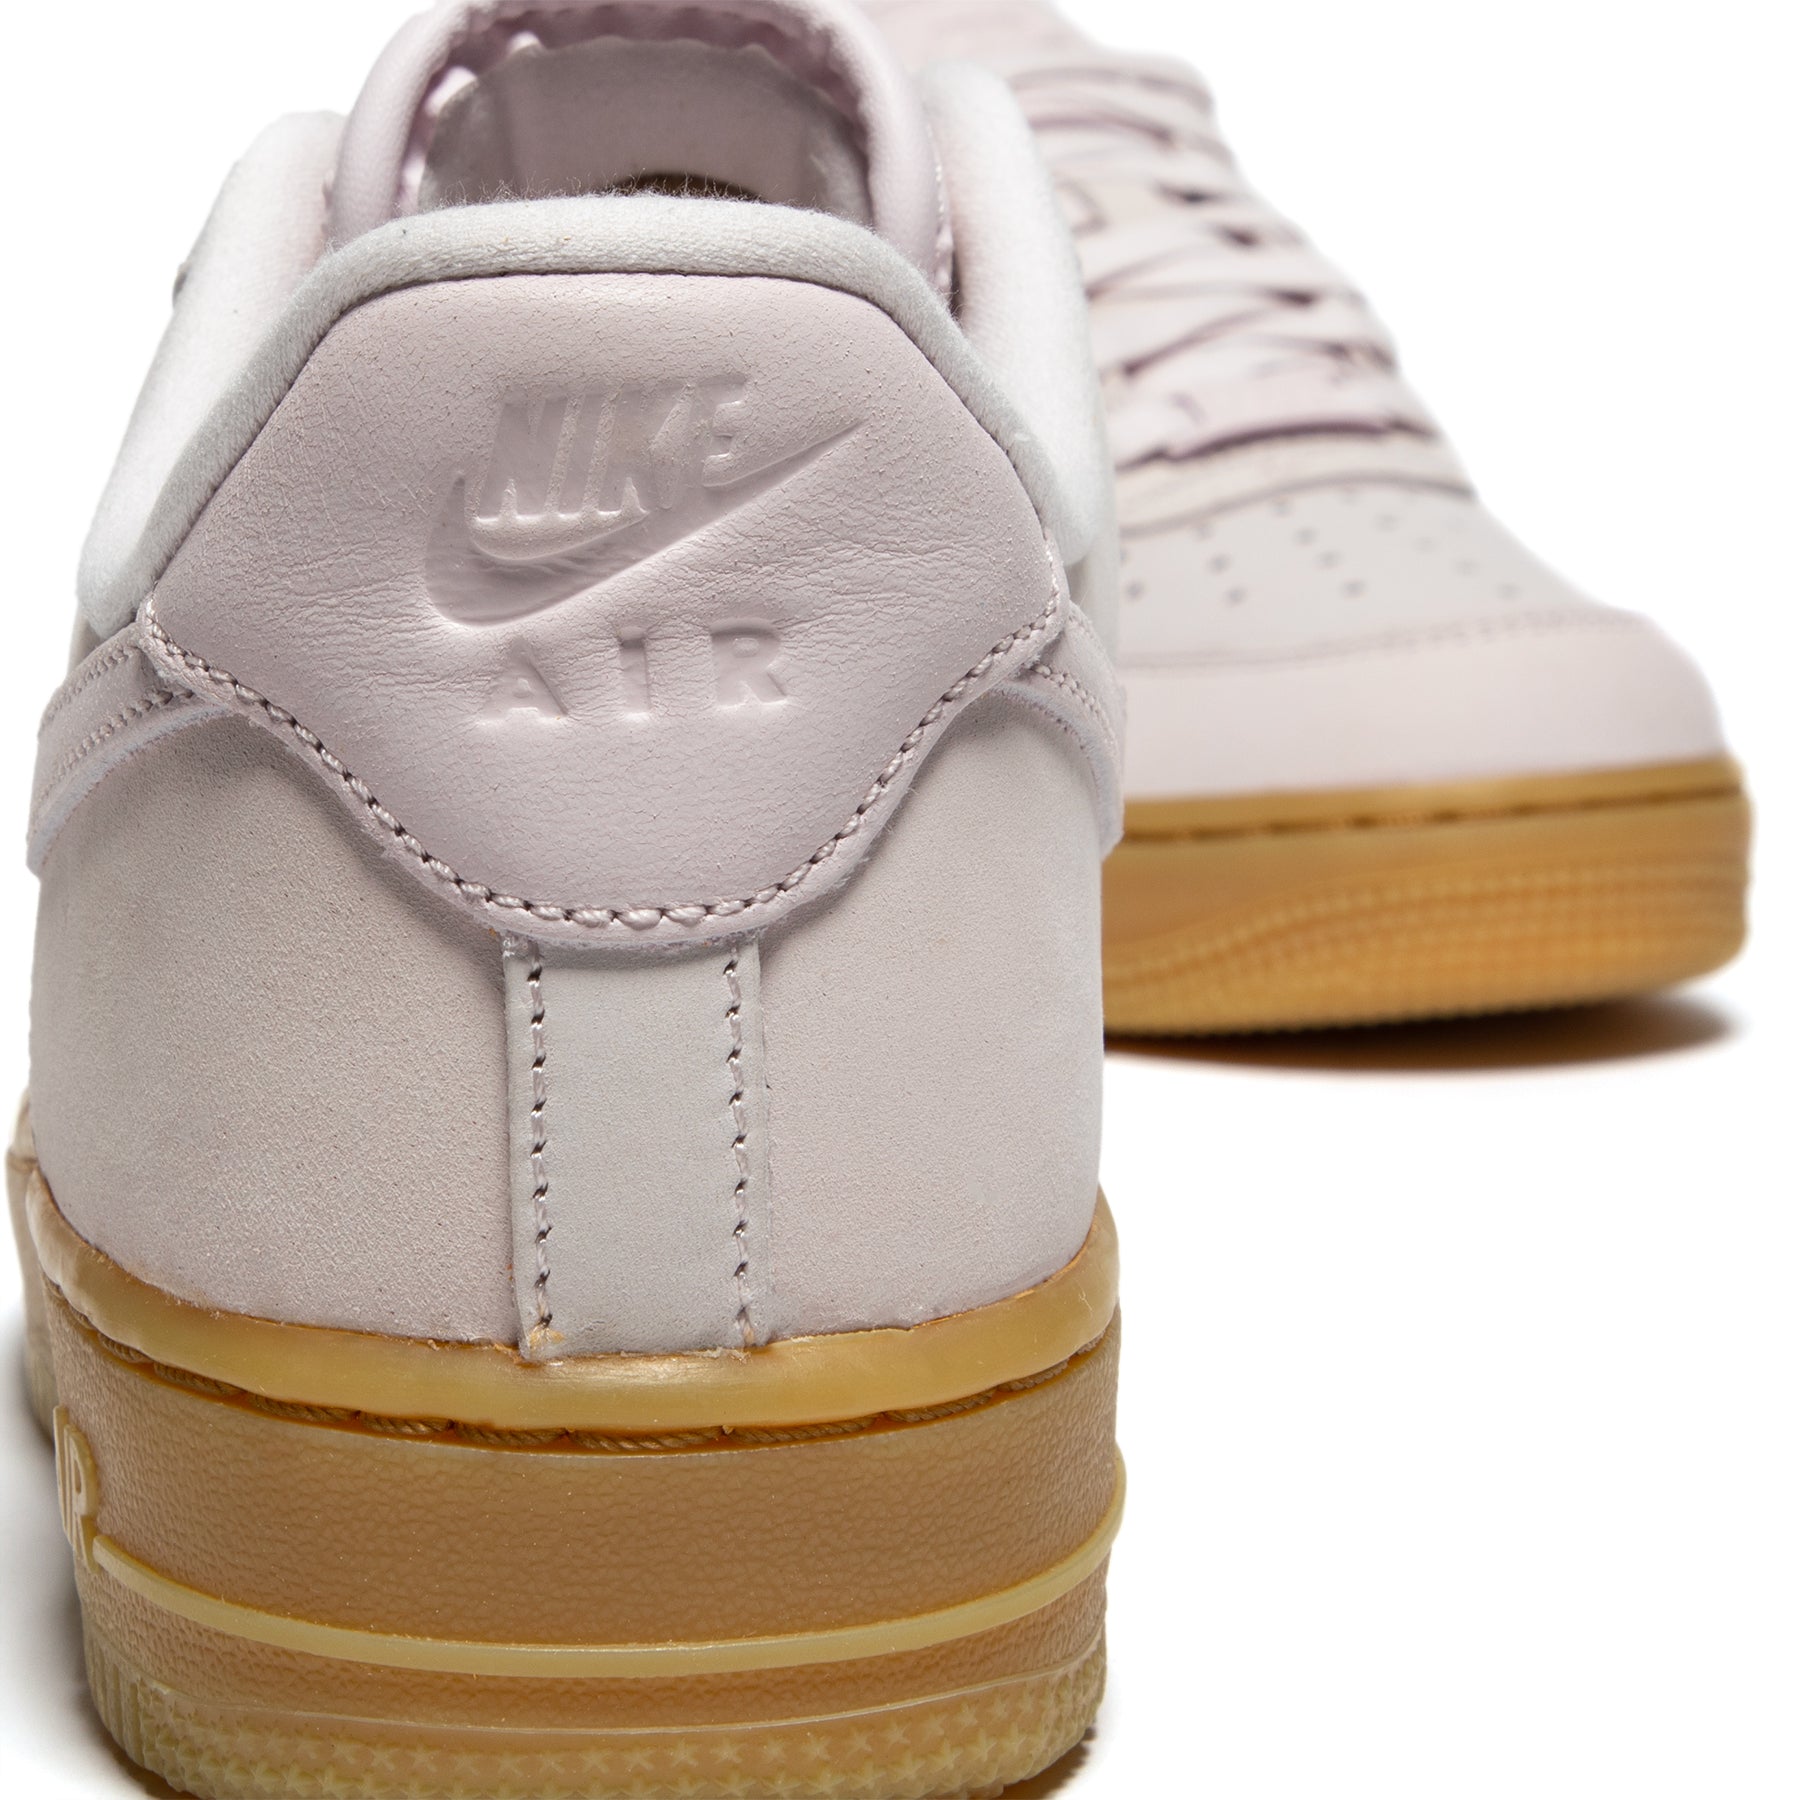 Nike Air Force 1 PRM Light Maroon DR9503-600